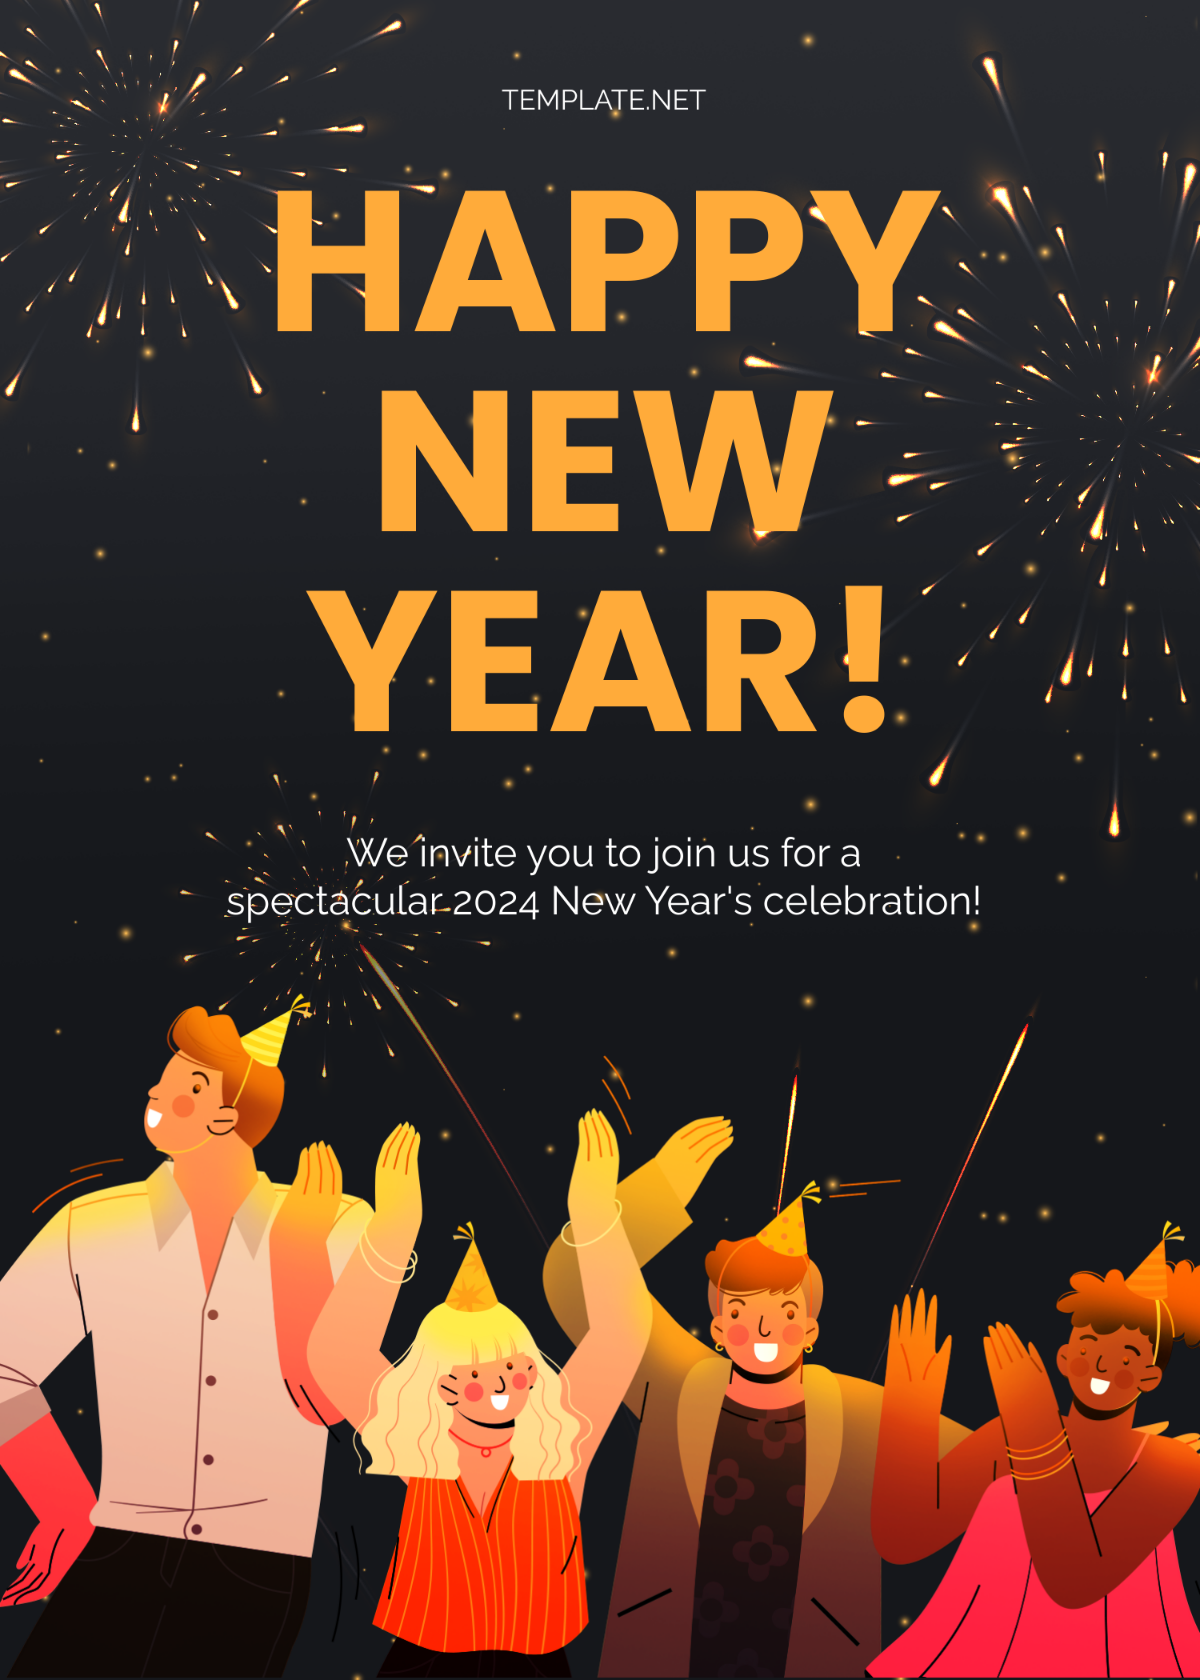 New Year Greetings Invitation Template